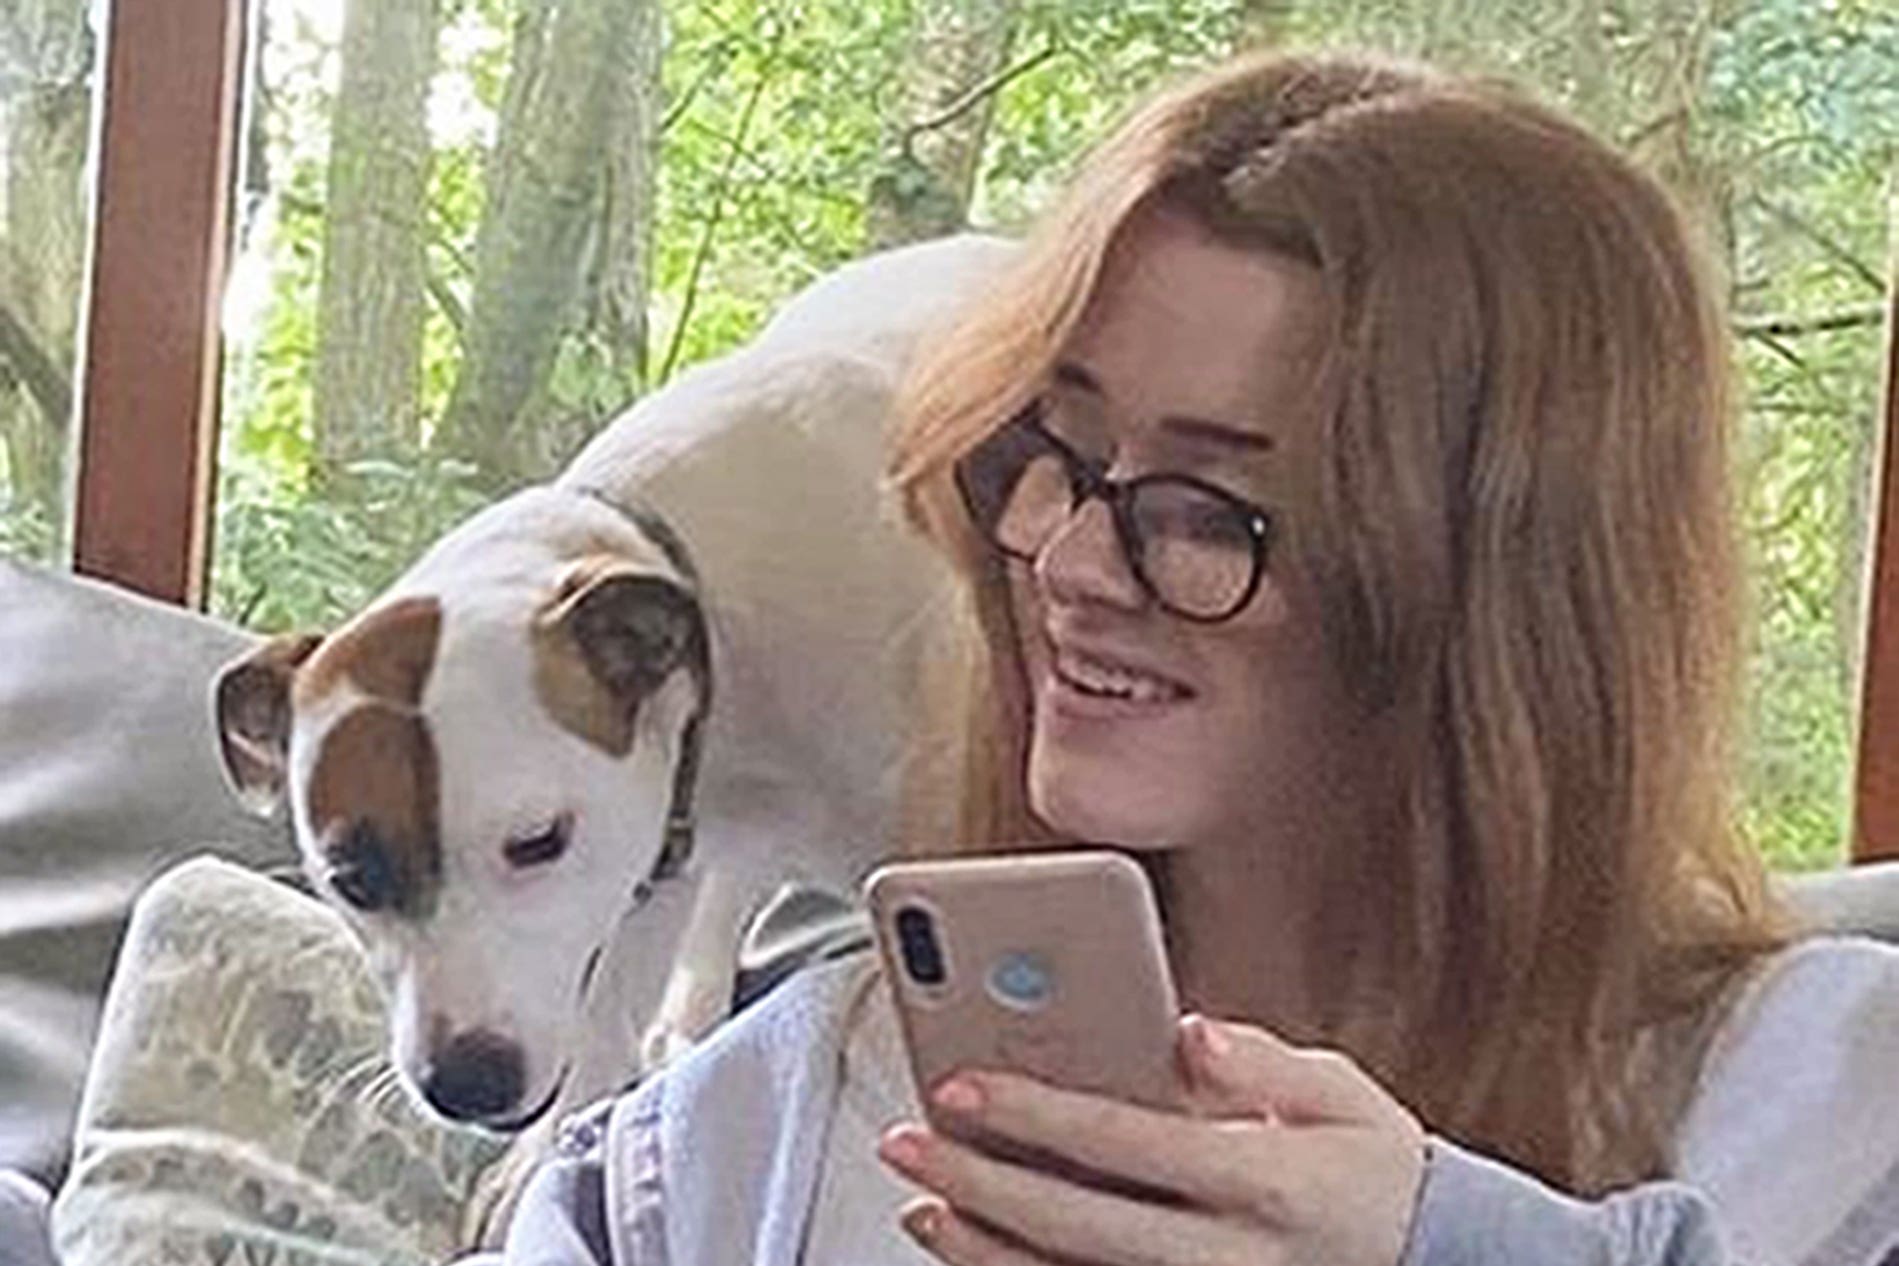 A boy and a girl have been found guilty of the brutal murder of teenager Brianna